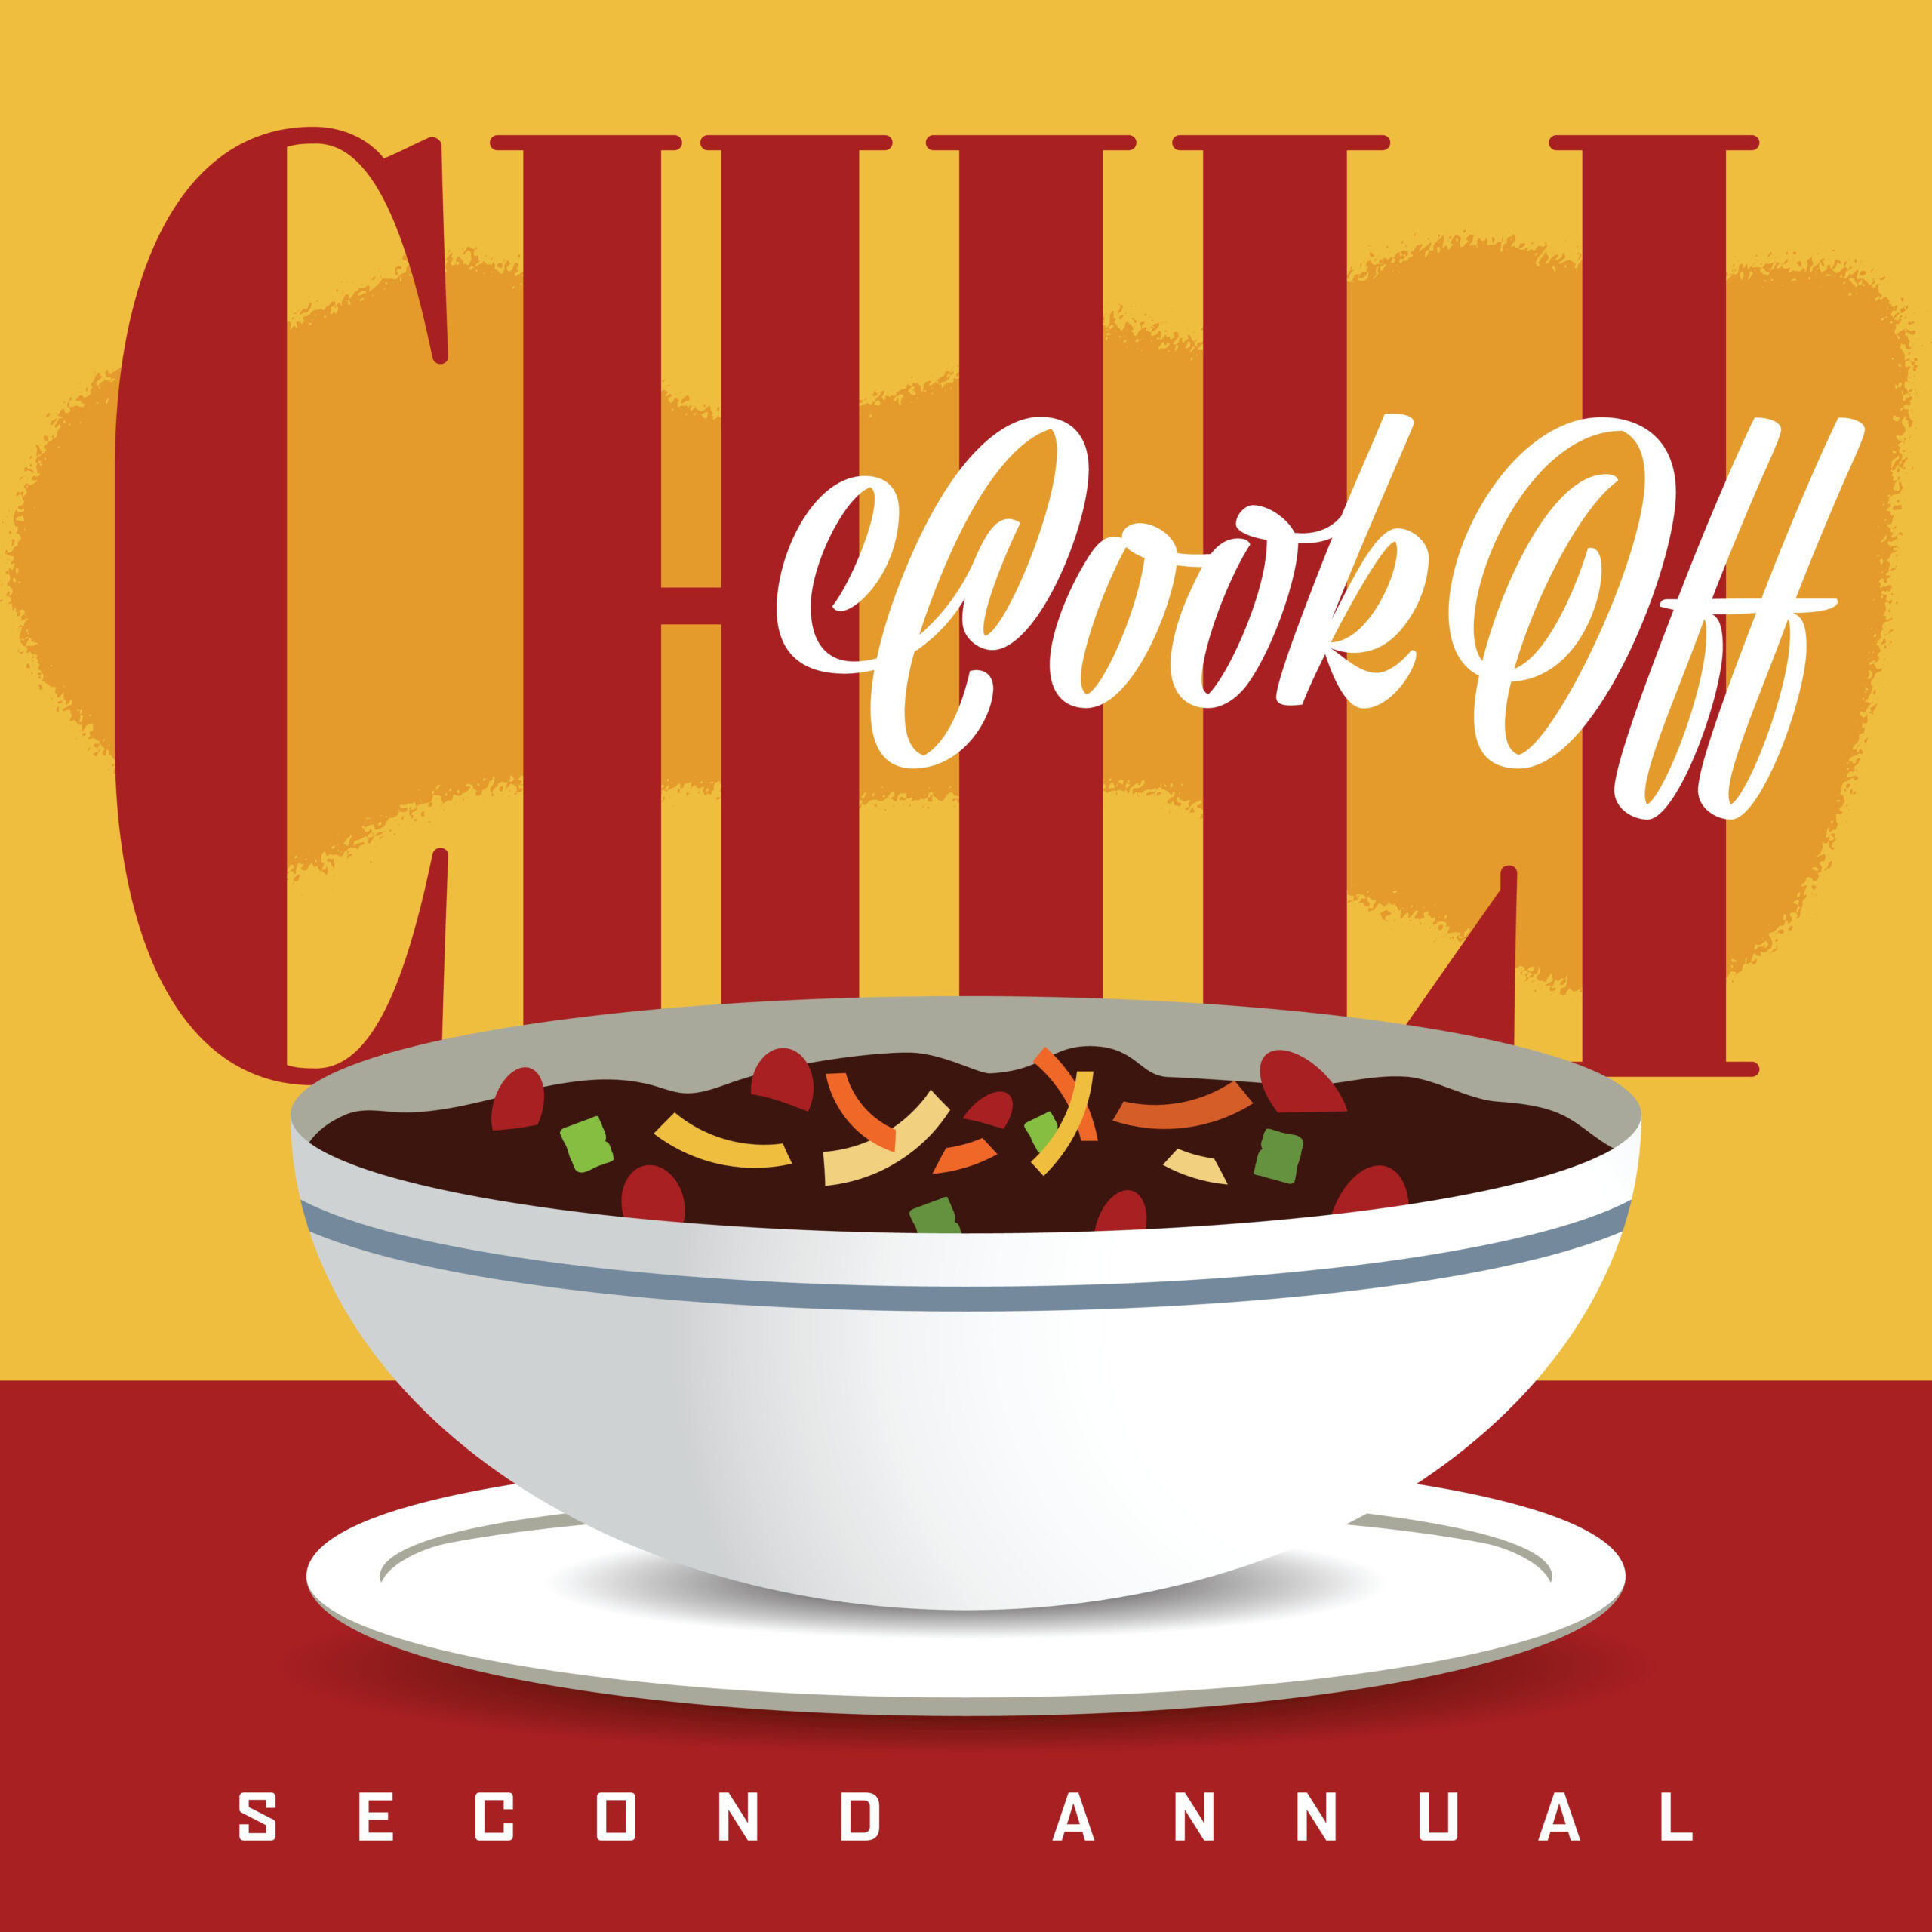 Chili cook off second annual poster.